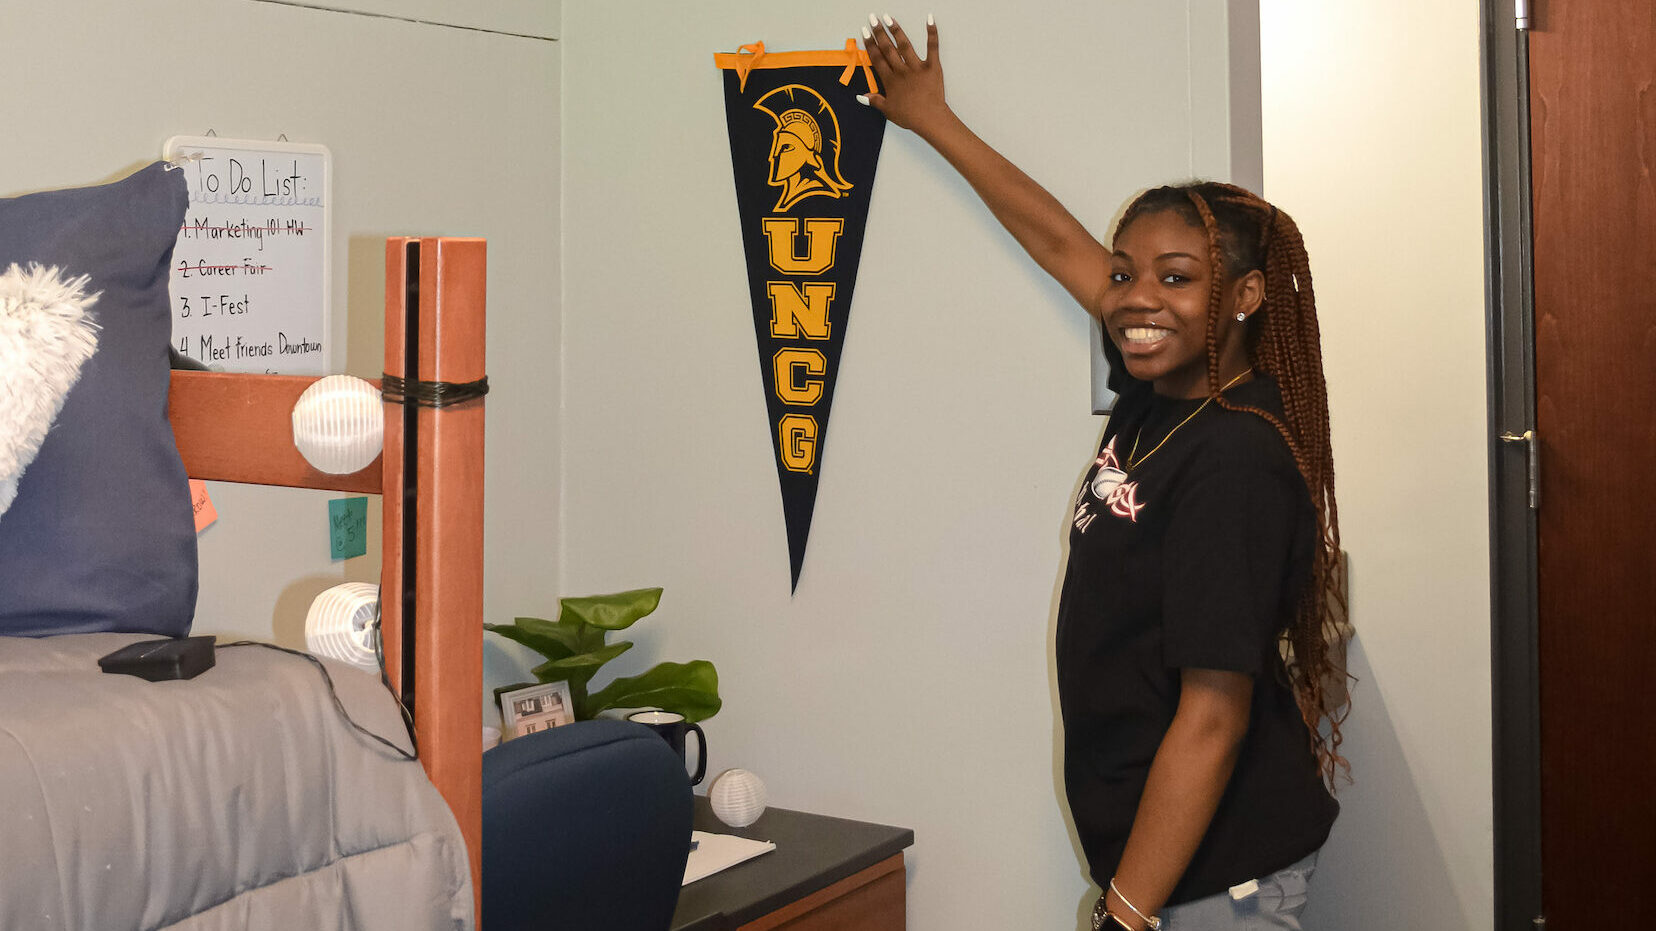 Connect to WiFi - UNCG Housing and Residence Life